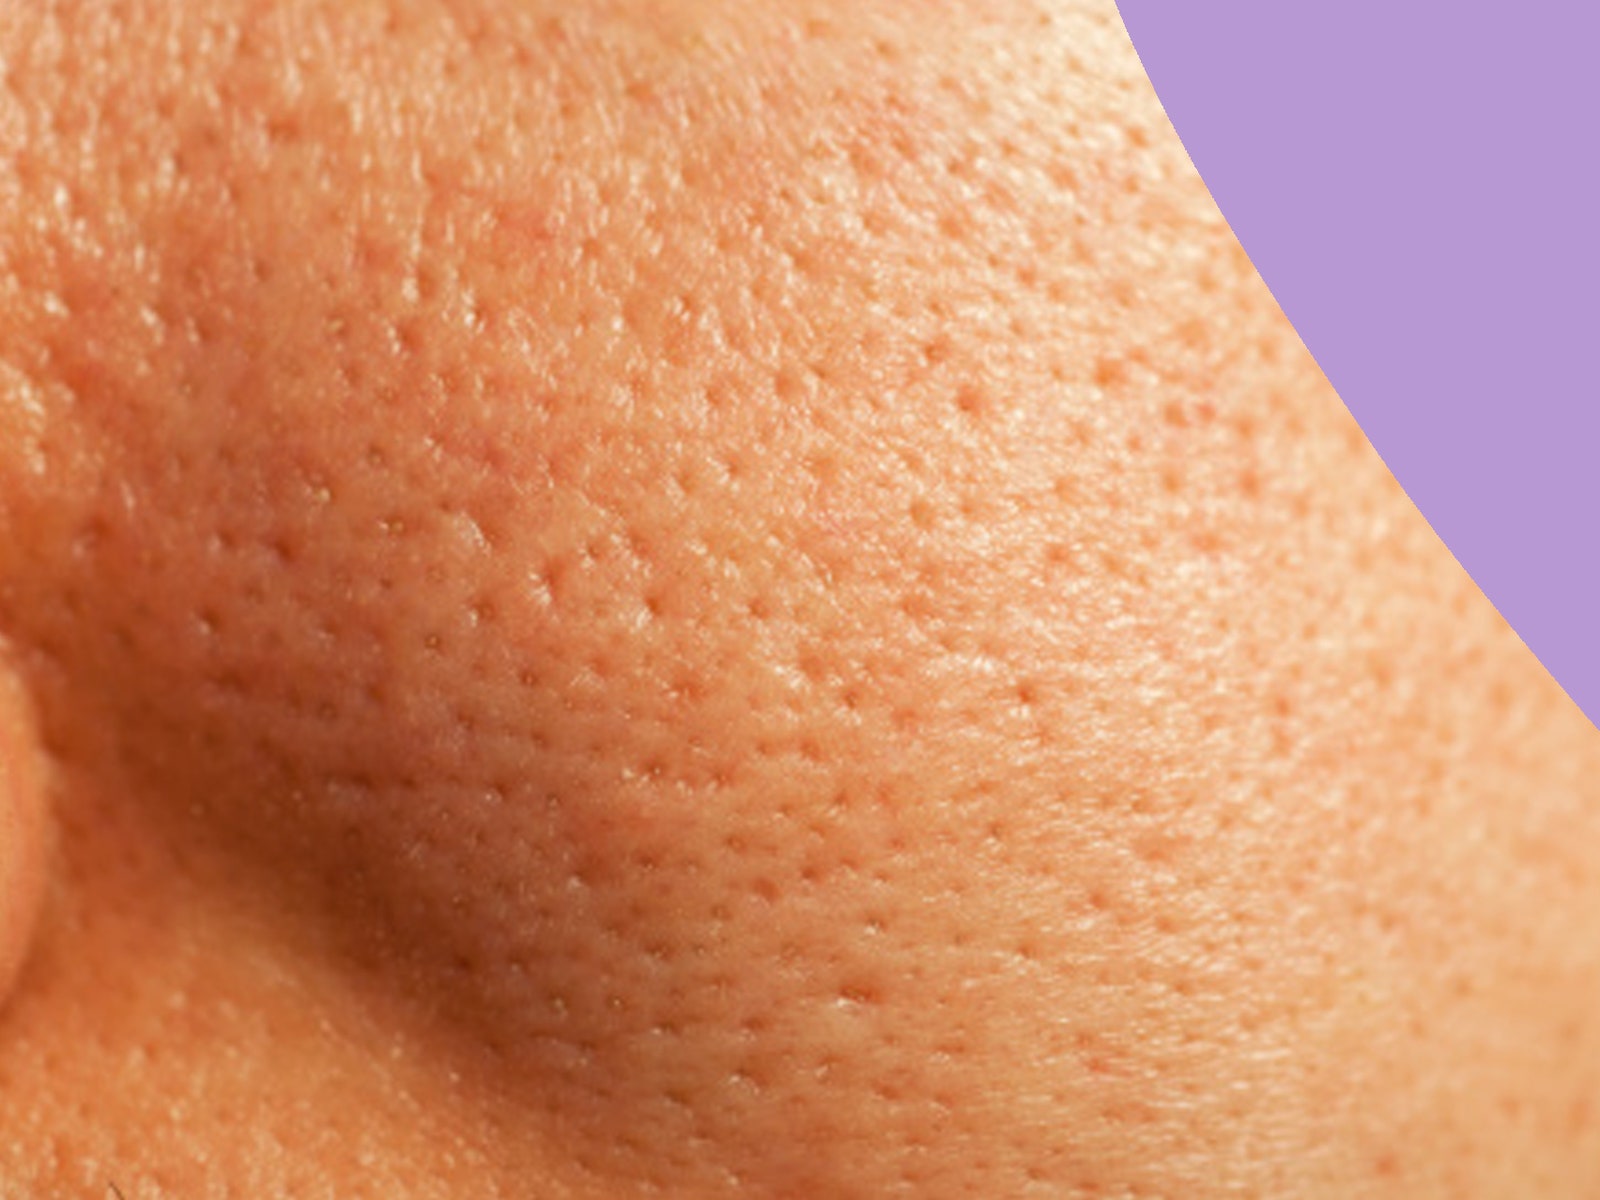 How to get rid of pores, according to the experts